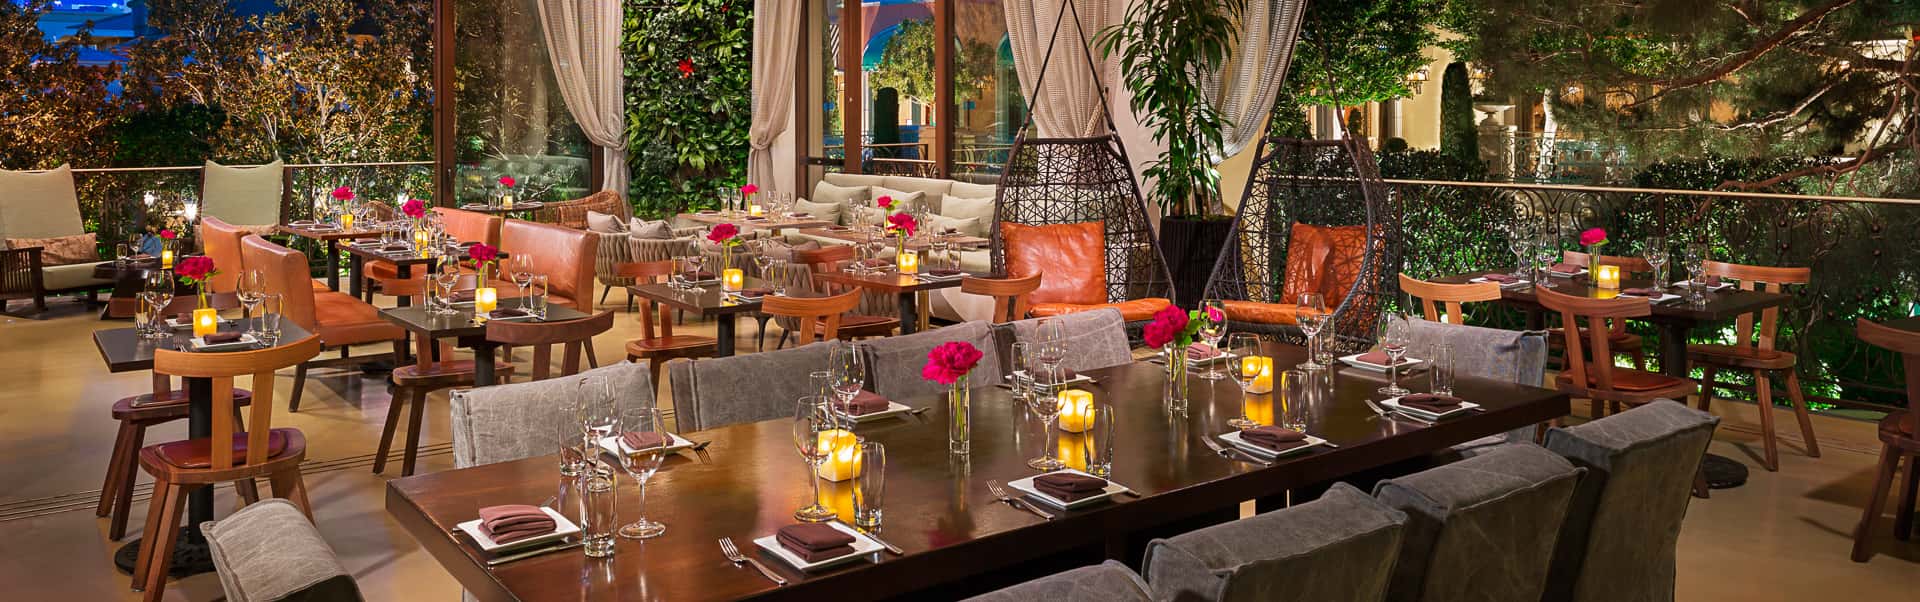 23 Patios for Outdoor Dining on the Las Vegas Strip